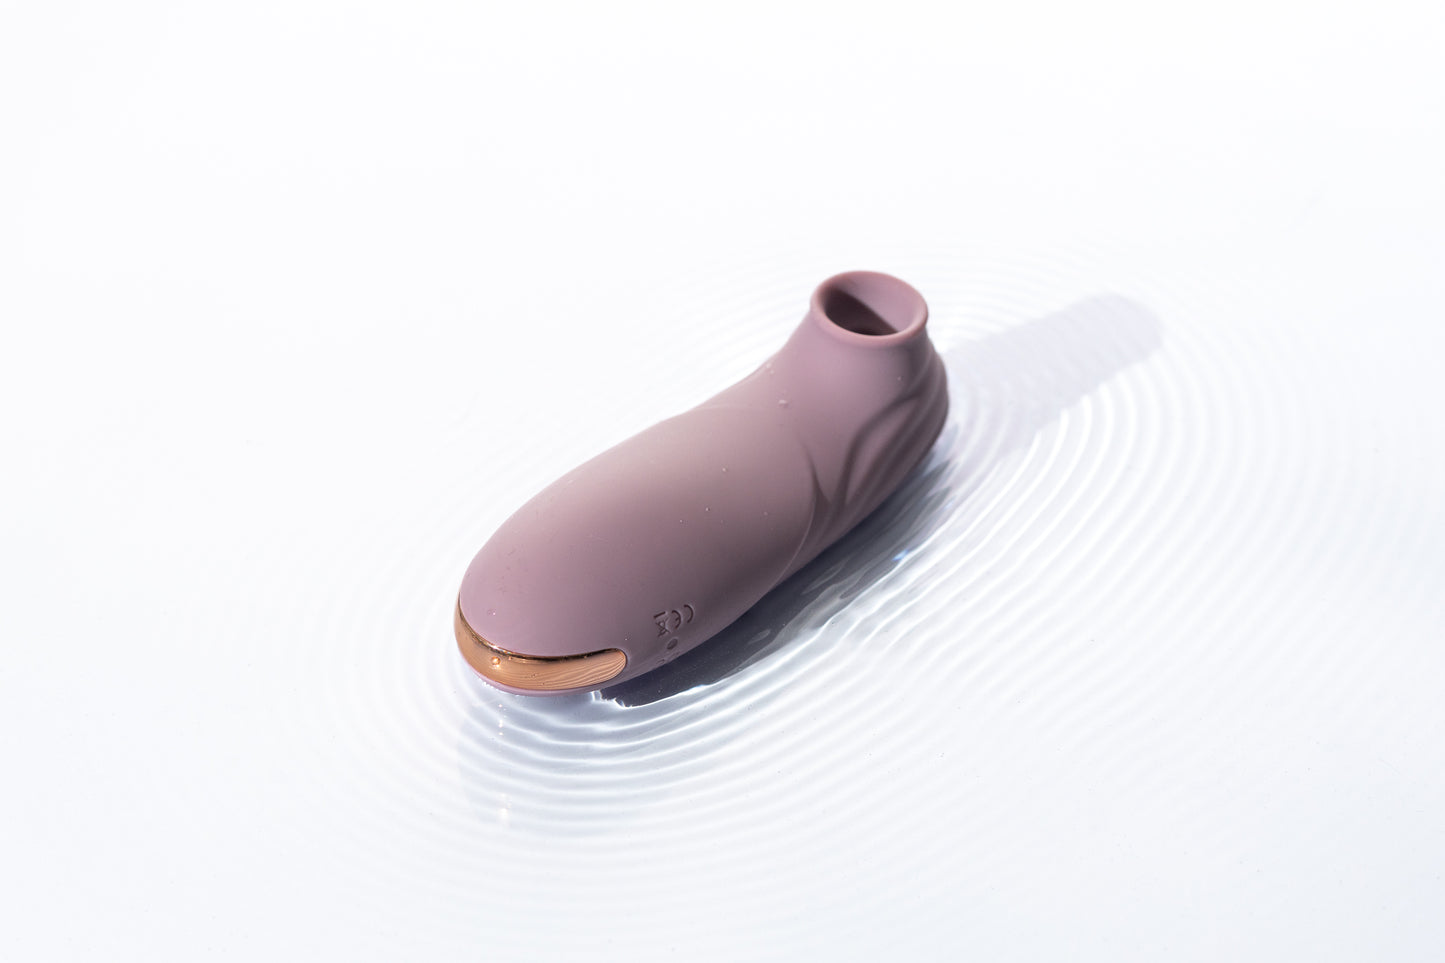 Submersible Marvel: Waterproof & Suction Vibrator - Elevate Your Bathtime Bliss"